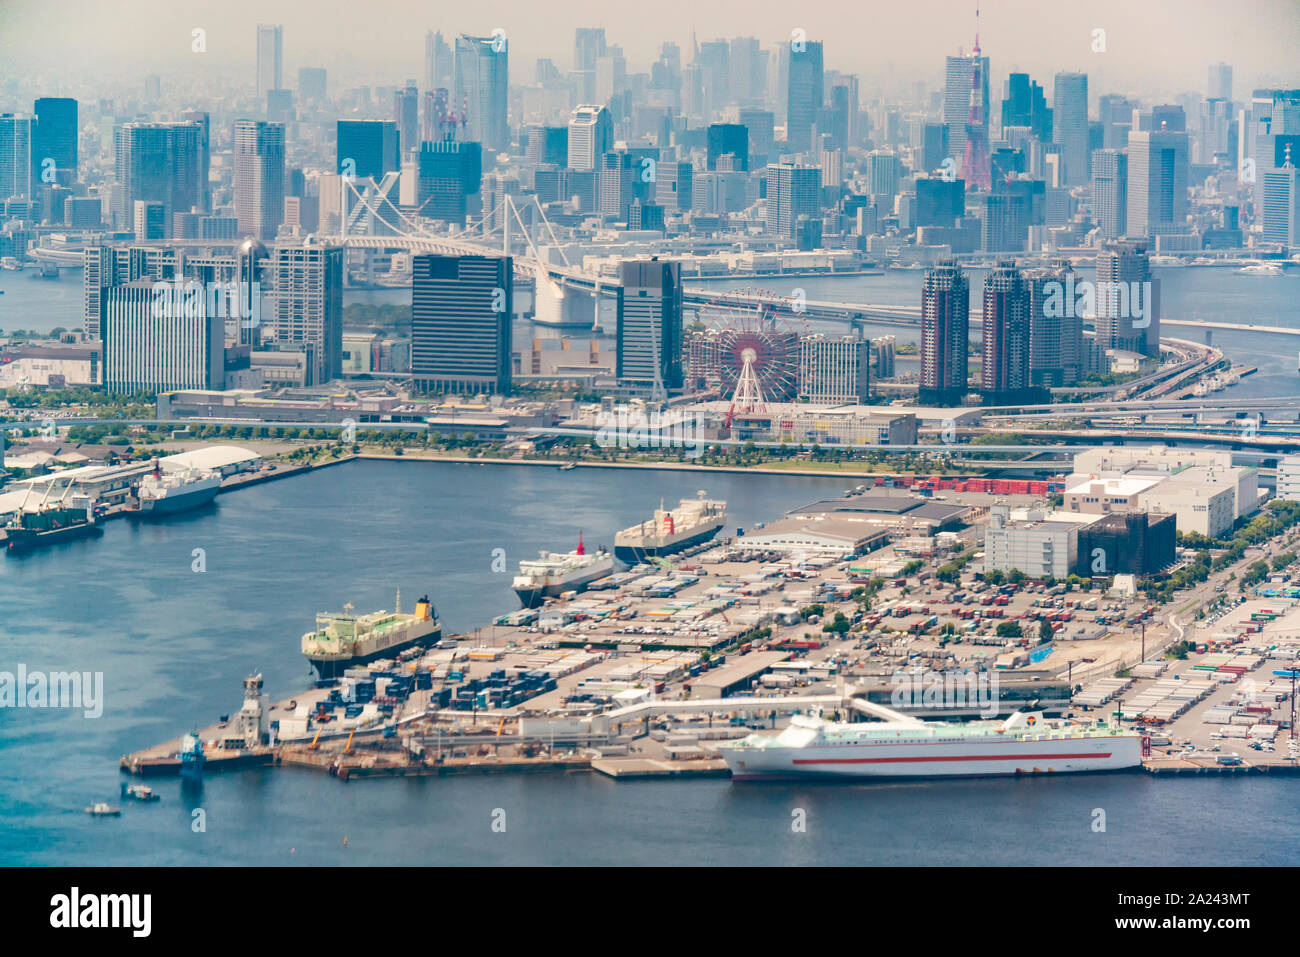 View on Toyo city from the airplane descending in Haneda airport Stock Photo